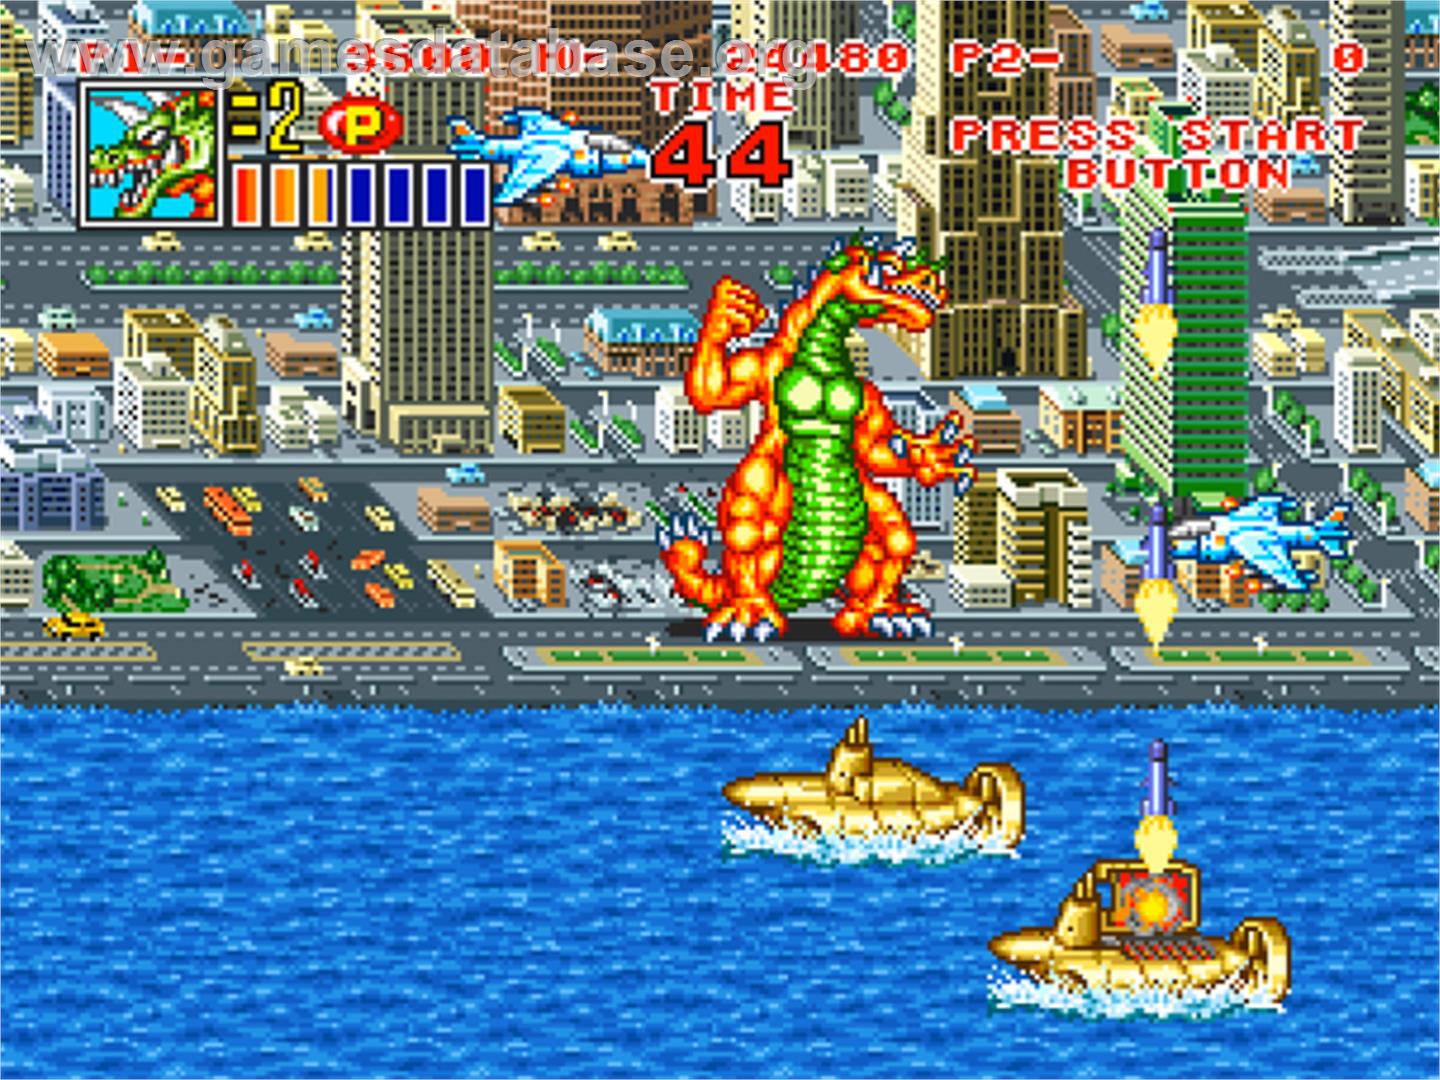 King of the Monsters 2: The Next Thing - SNK Neo-Geo CD - Artwork - In Game